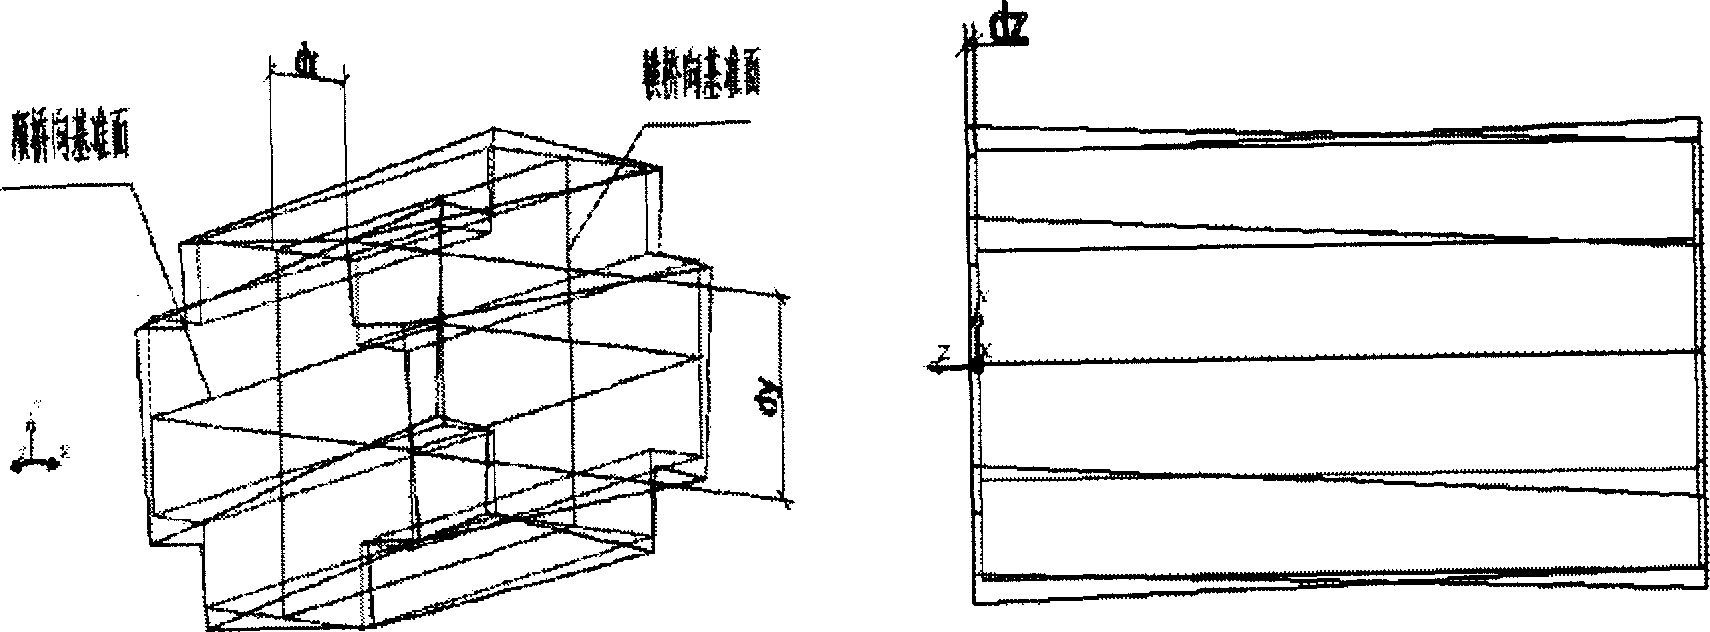 Method of reference counting before cable tower segmental face machining